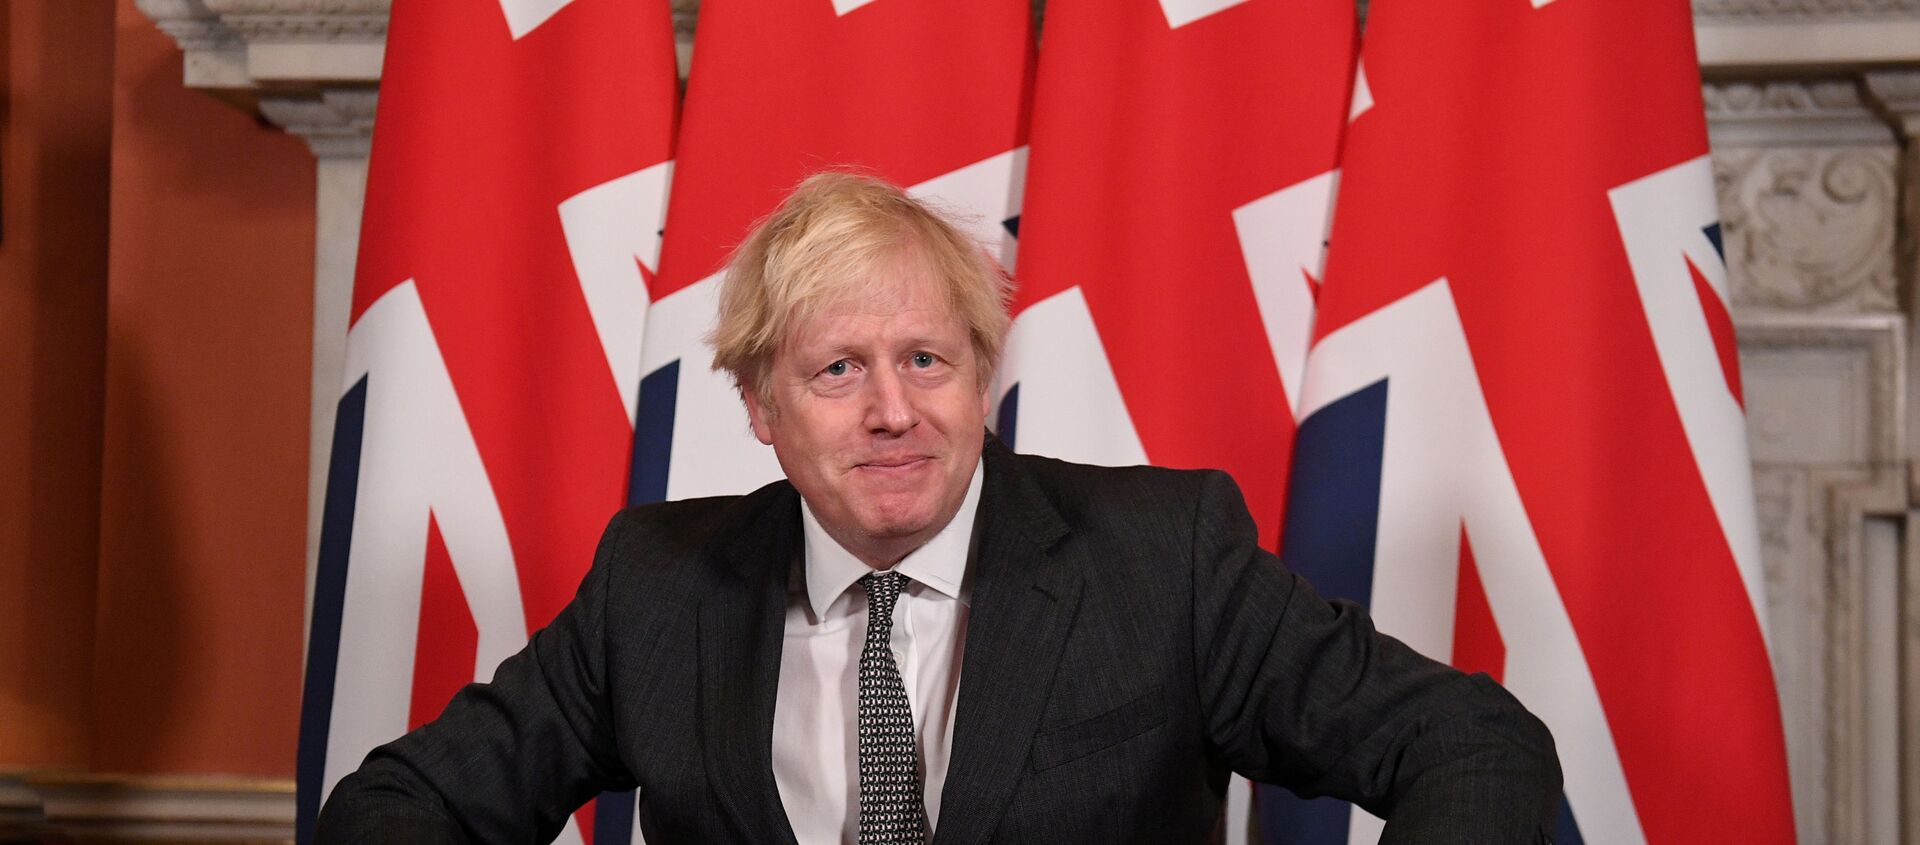 Britain's Prime Minister Boris Johnson reacts after signing the Brexit trade deal with the EU - Sputnik International, 1920, 12.02.2021